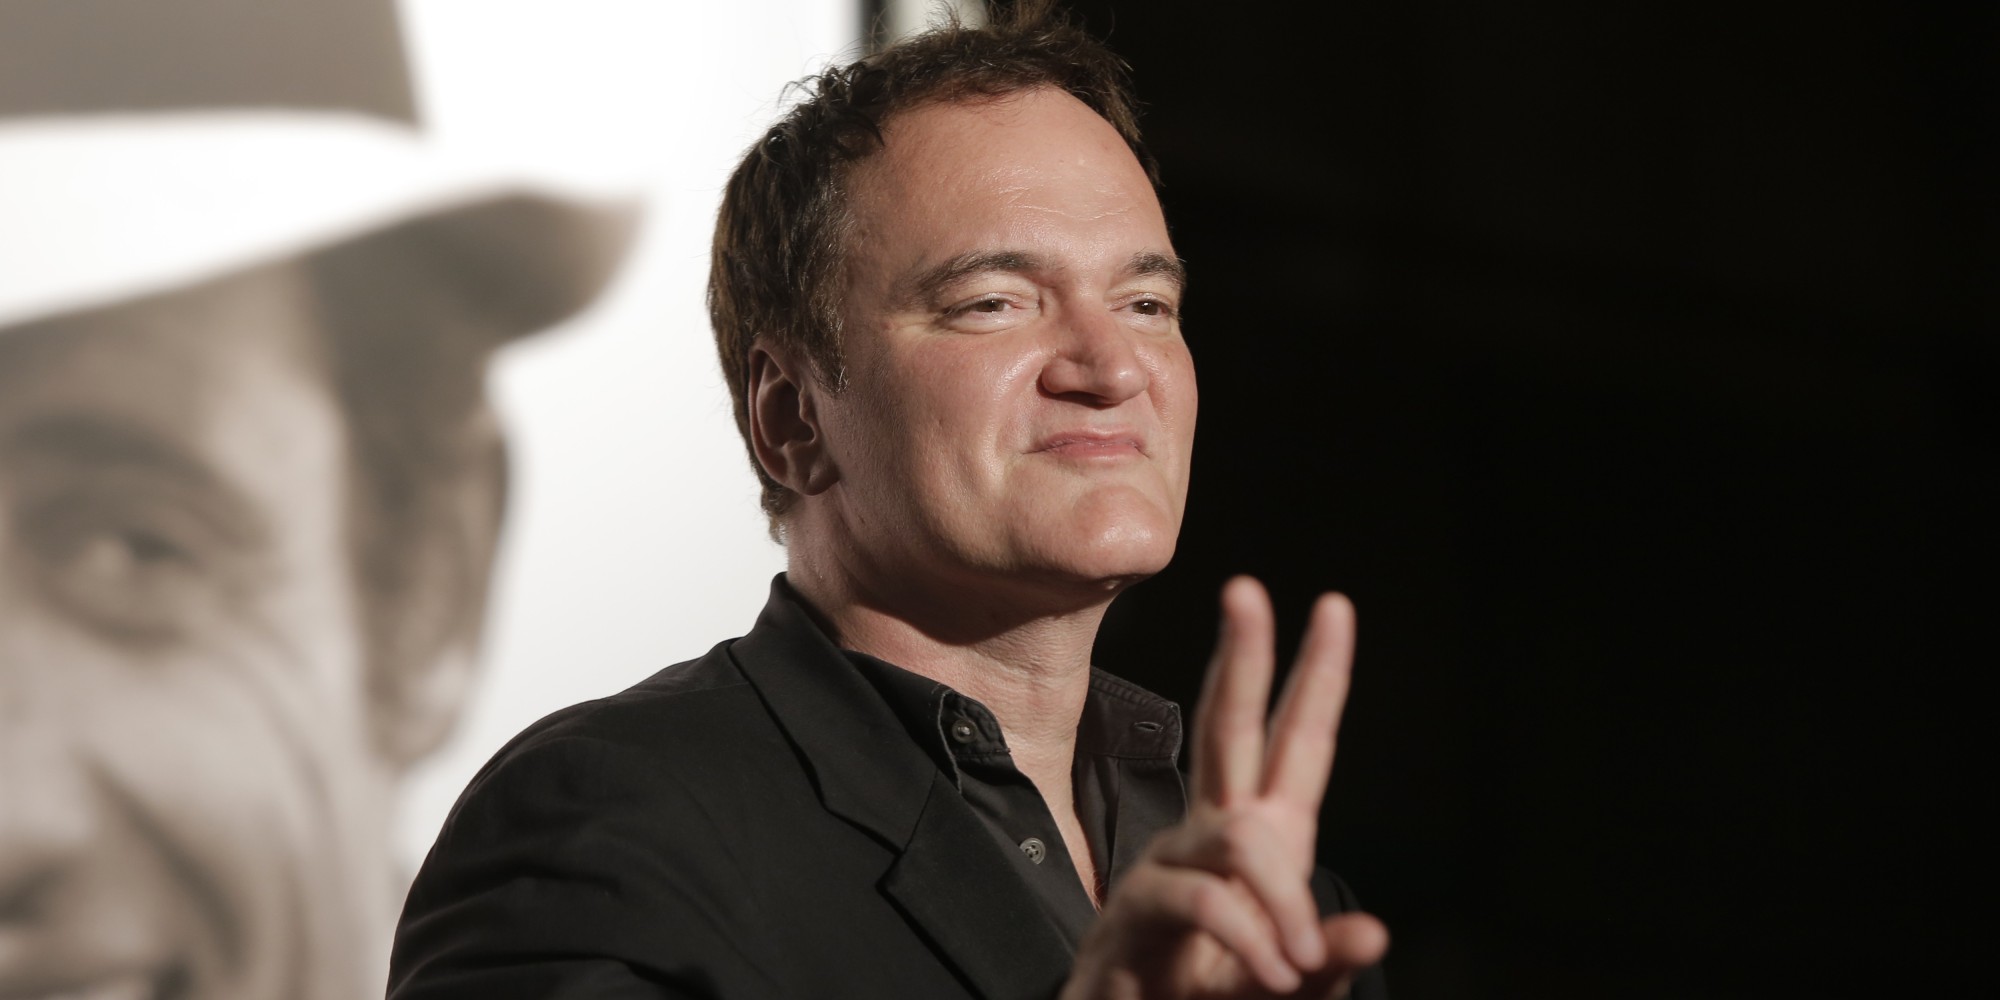 Director Quentin Tarantino gestures as he arrives at the 5th edition of the Lumiere Festival, in Lyon, central France, Monday, Oct. 14, 2013. (AP Photo/Laurent Cipriani)